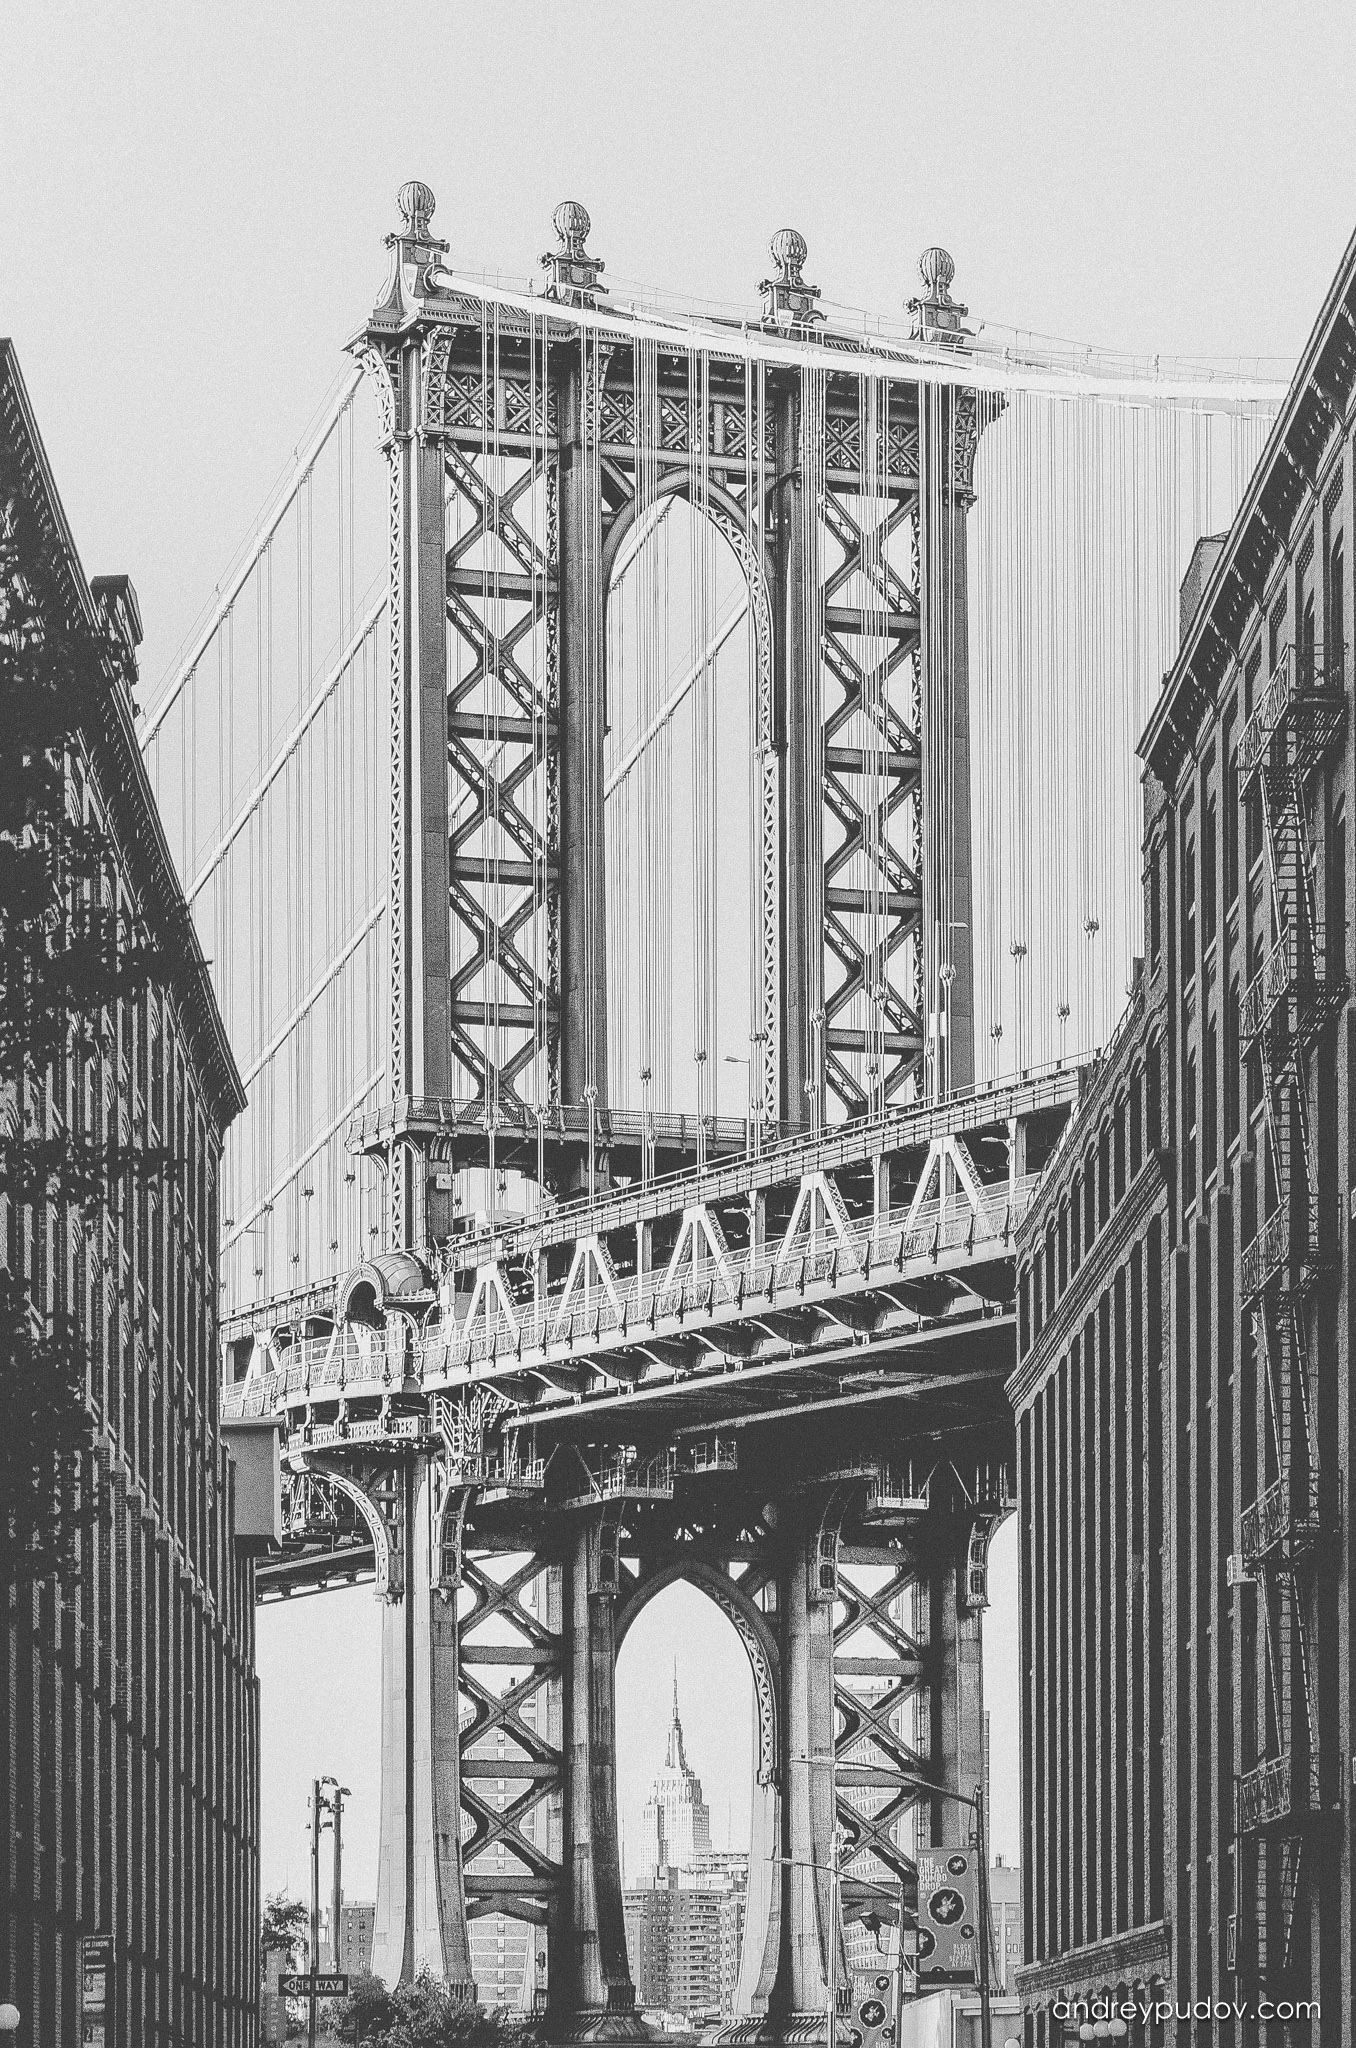 Favorite Photographs - Dumbo

The area known as Dumbo used to be known as Gairville. The area was originally a ferry landing, characterized by 19th- and early 20th-century industrial and warehouse buildings, Belgian block streets, and its location on the East River by the imposing anchorage of the Manhattan Bridge. The entirety of Dumbo was bought by developer David Walentas and his company Two Trees Management in the late 20th century, and remade into an upscale residential and commercial community—first becoming a haven for art galleries, and currently a center for technology startups.